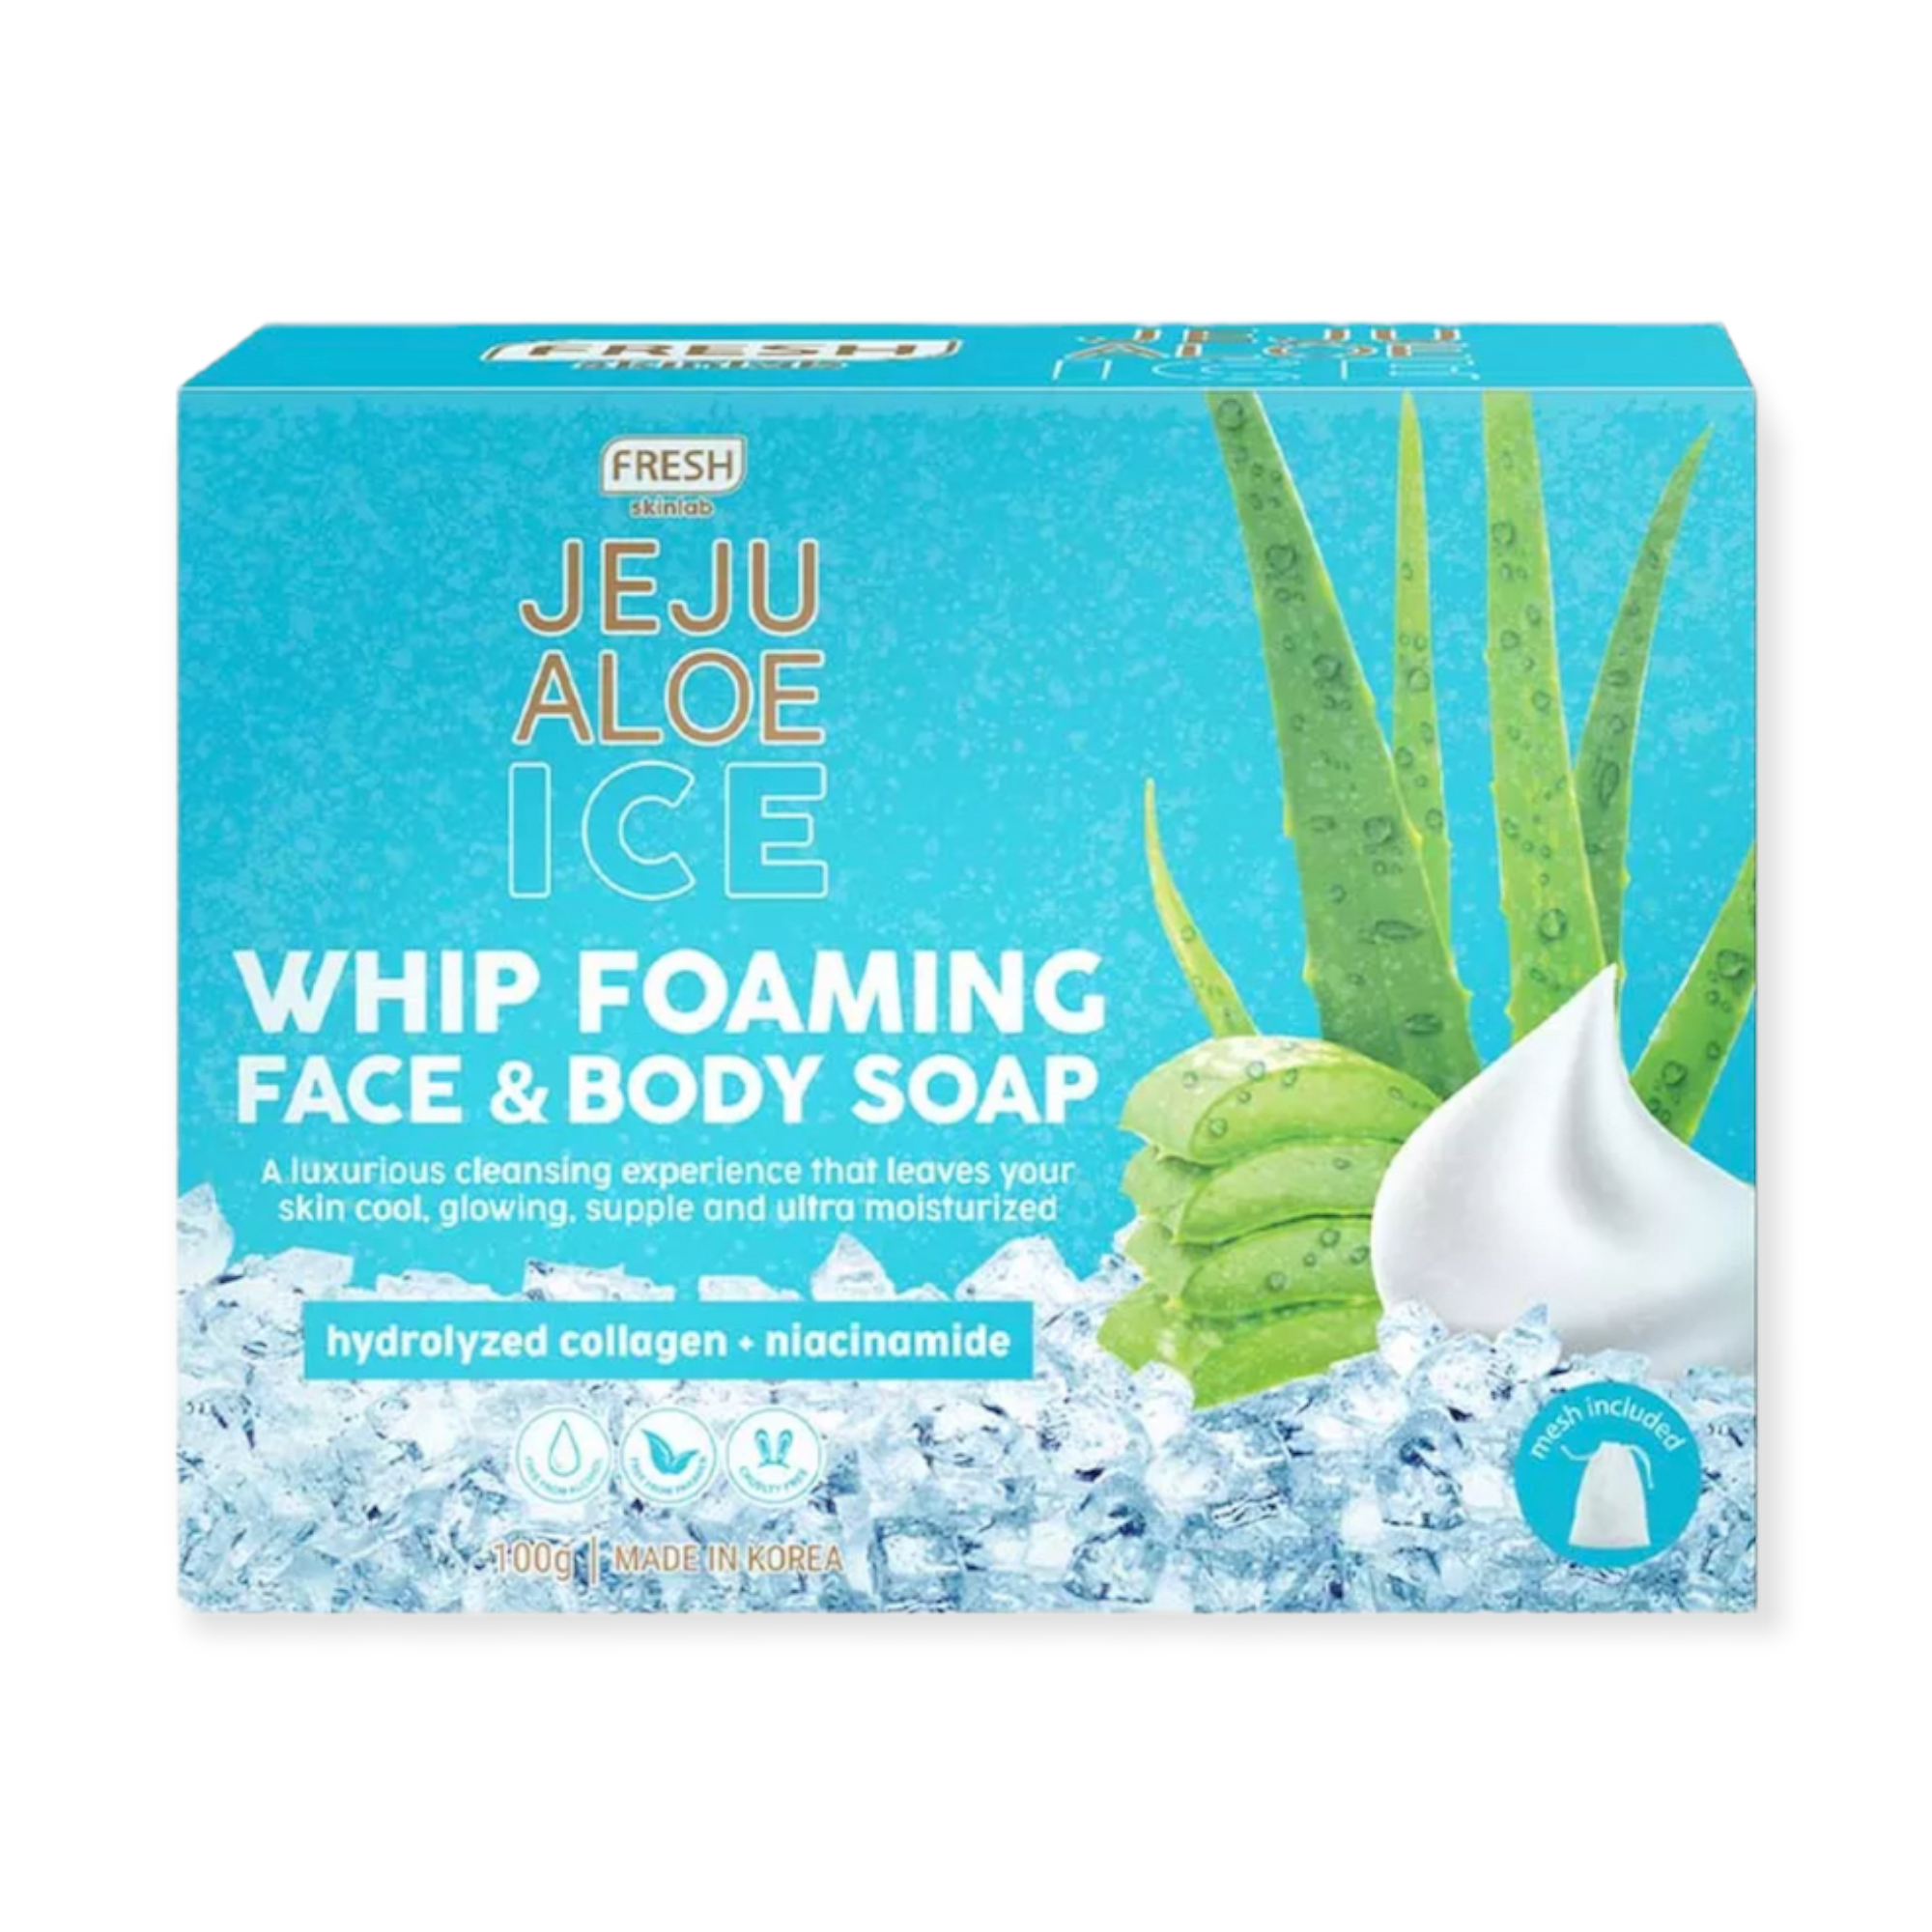 Jeju Aloe Ice - Whip Foaming Face and Body Soap 100g